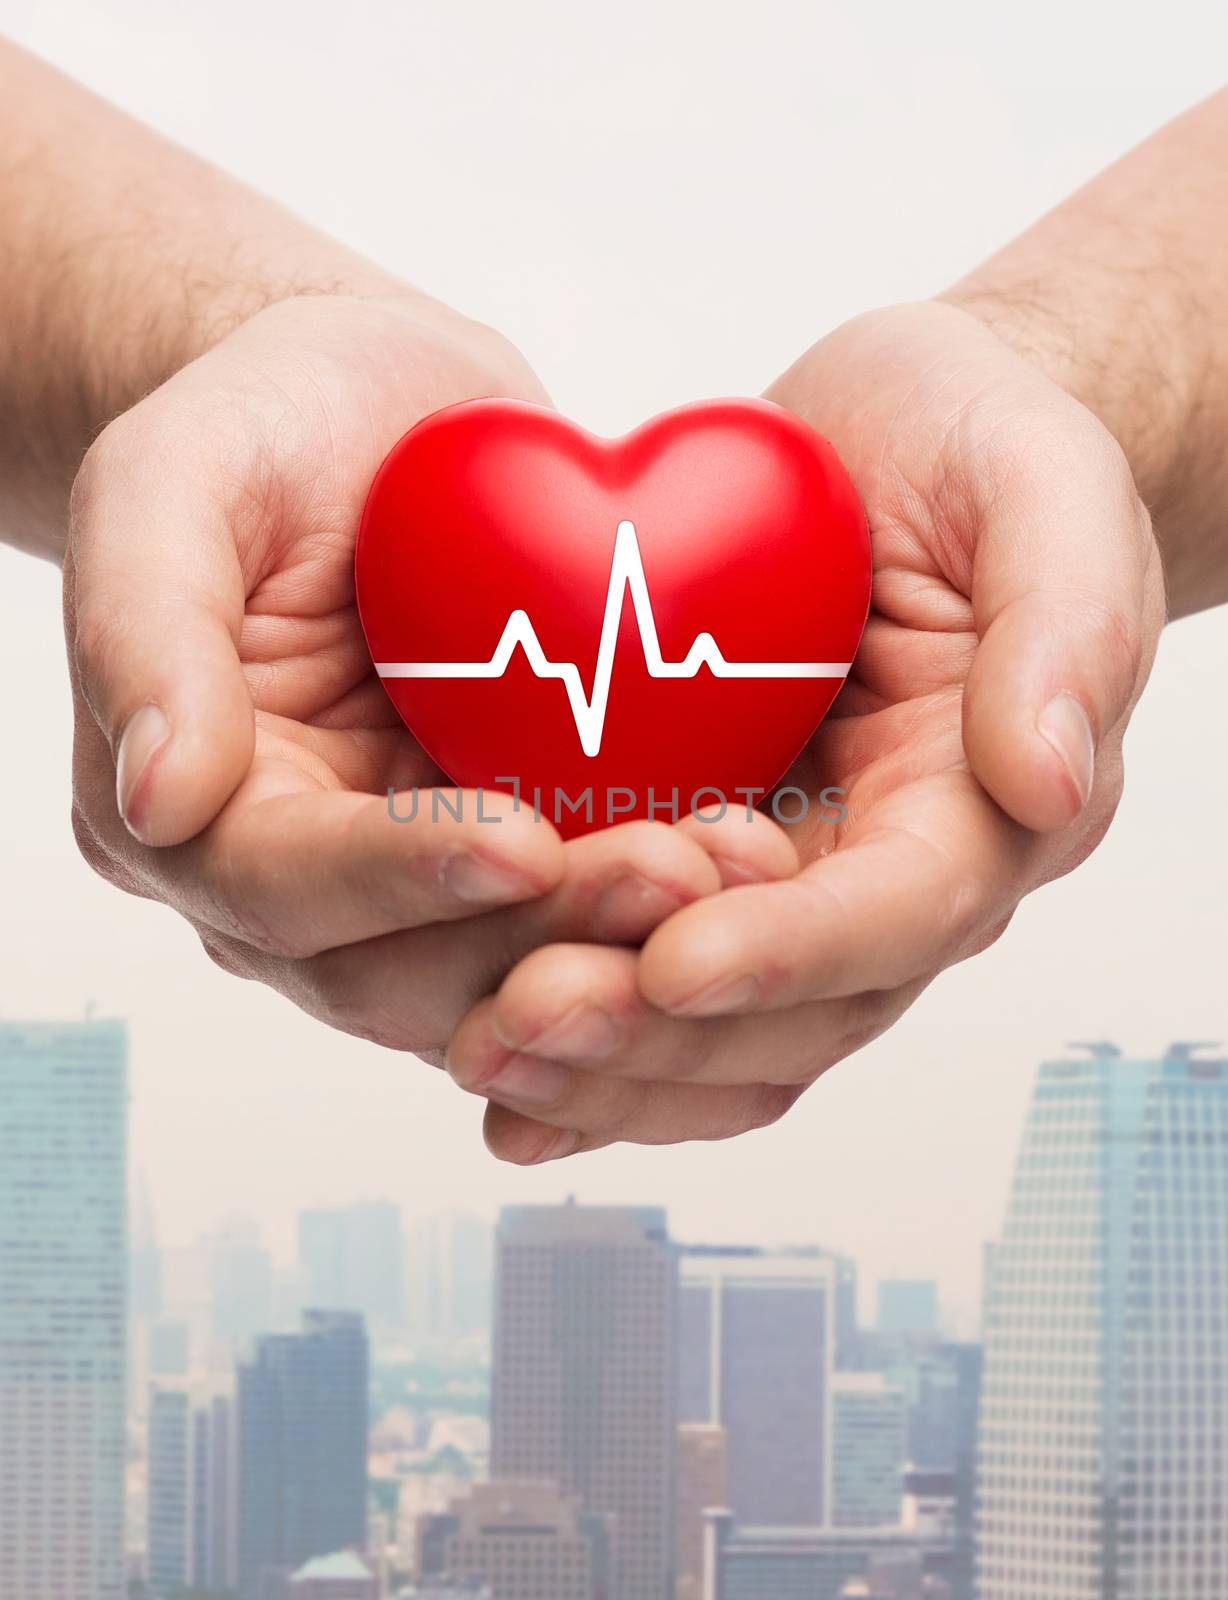 family health, charity and medicine concept - close up of hands holding red heart with cardiogram over city skyscrapers background